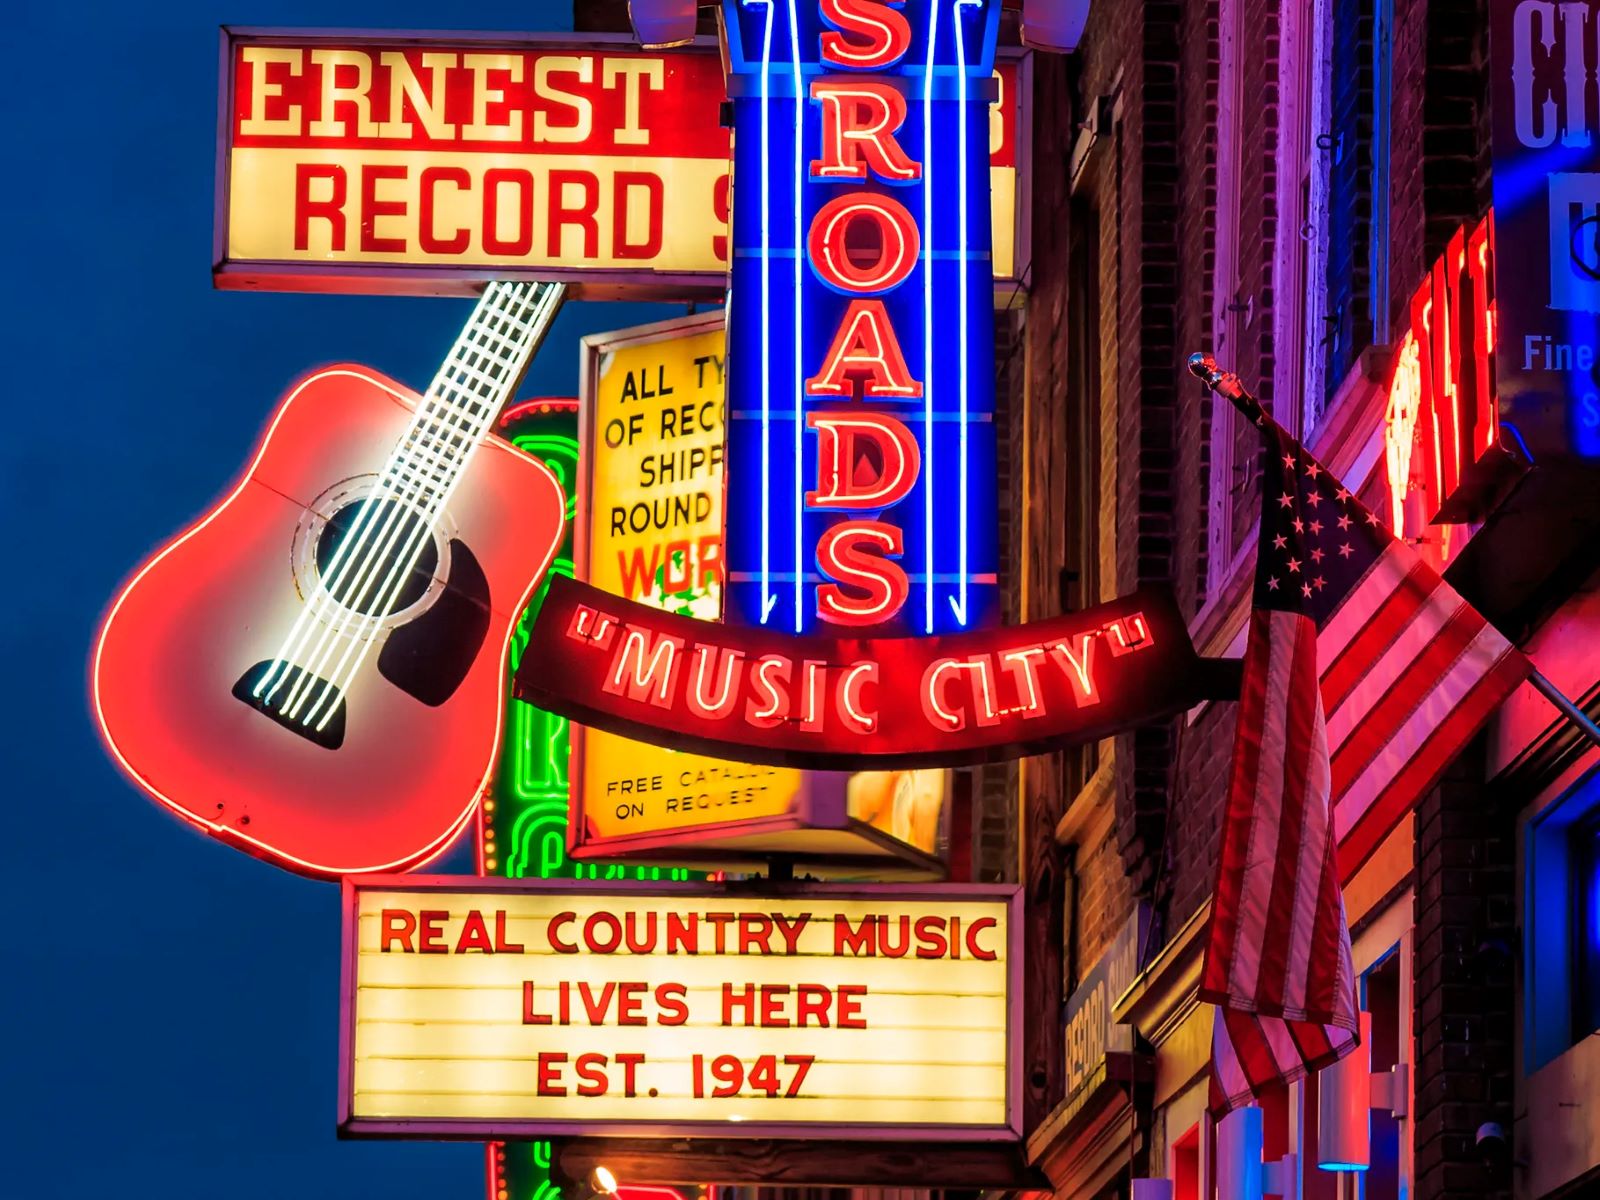 What Record Label Helped Launch The Recording Industry In Nashville?